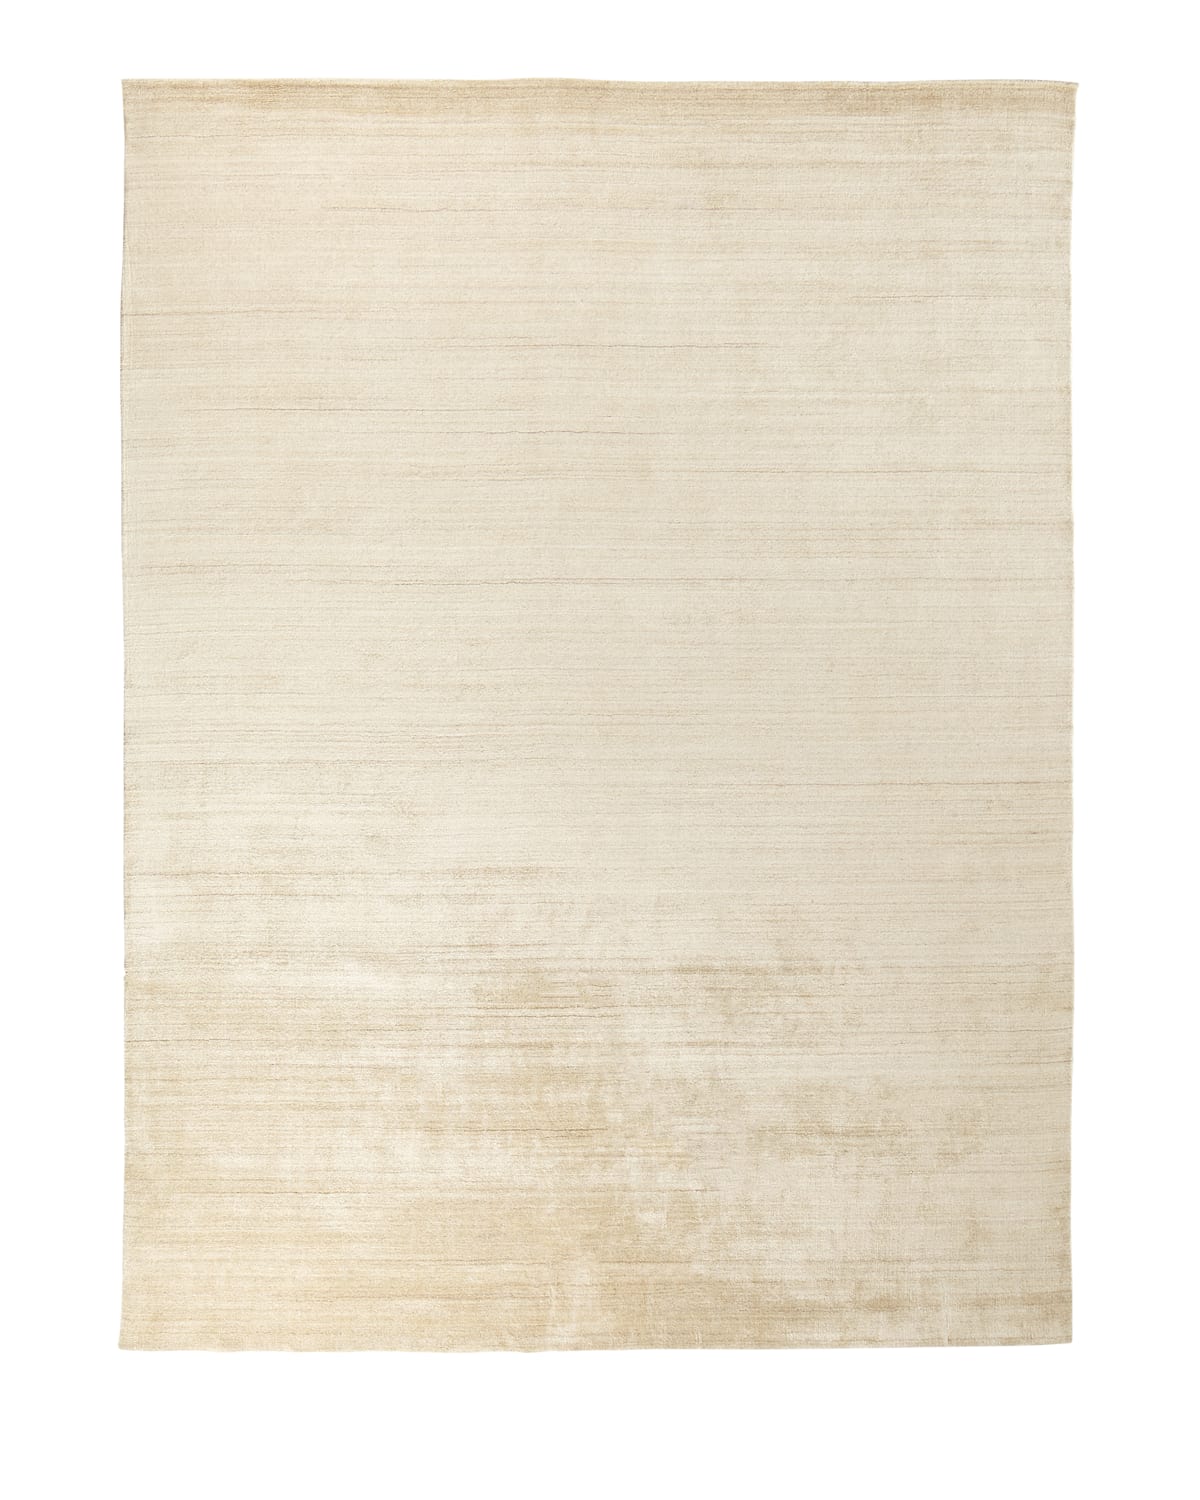 Exquisite Rugs Thames Rug, 12' X 15'